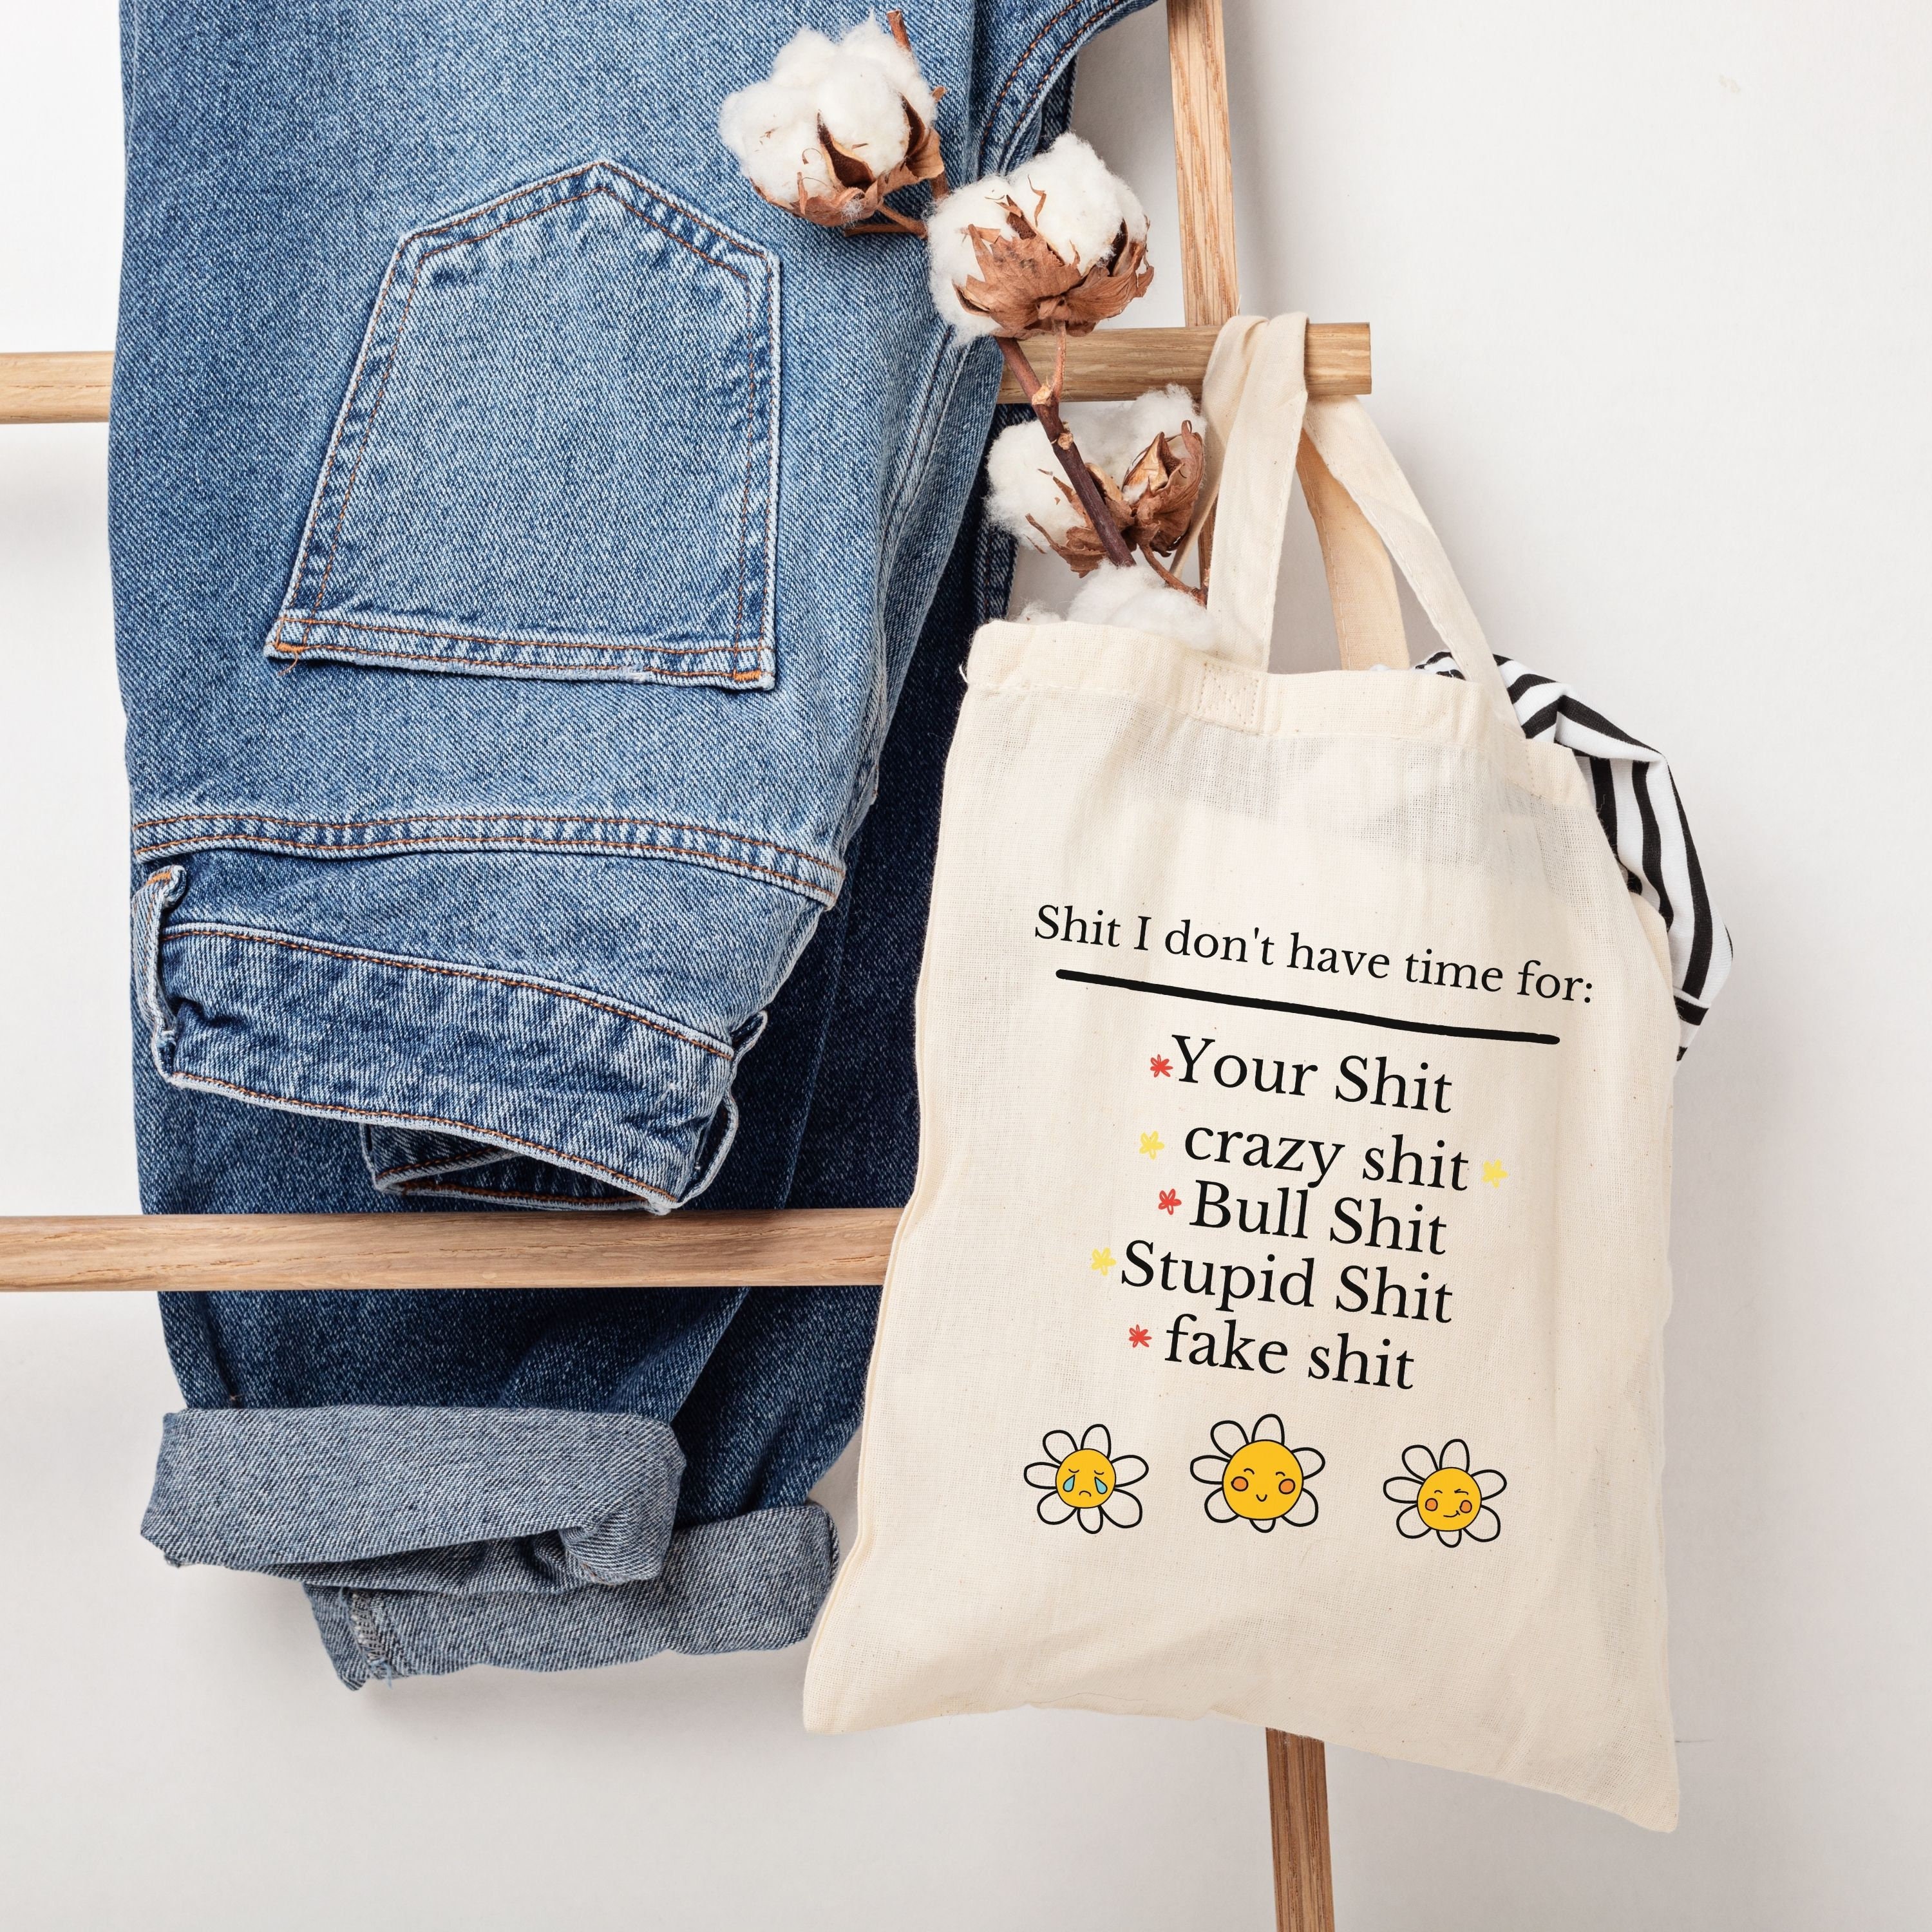 Contents Stuff I Don't Need Money Funny Shopping Cotton bag Canvas Tote Bag T90 